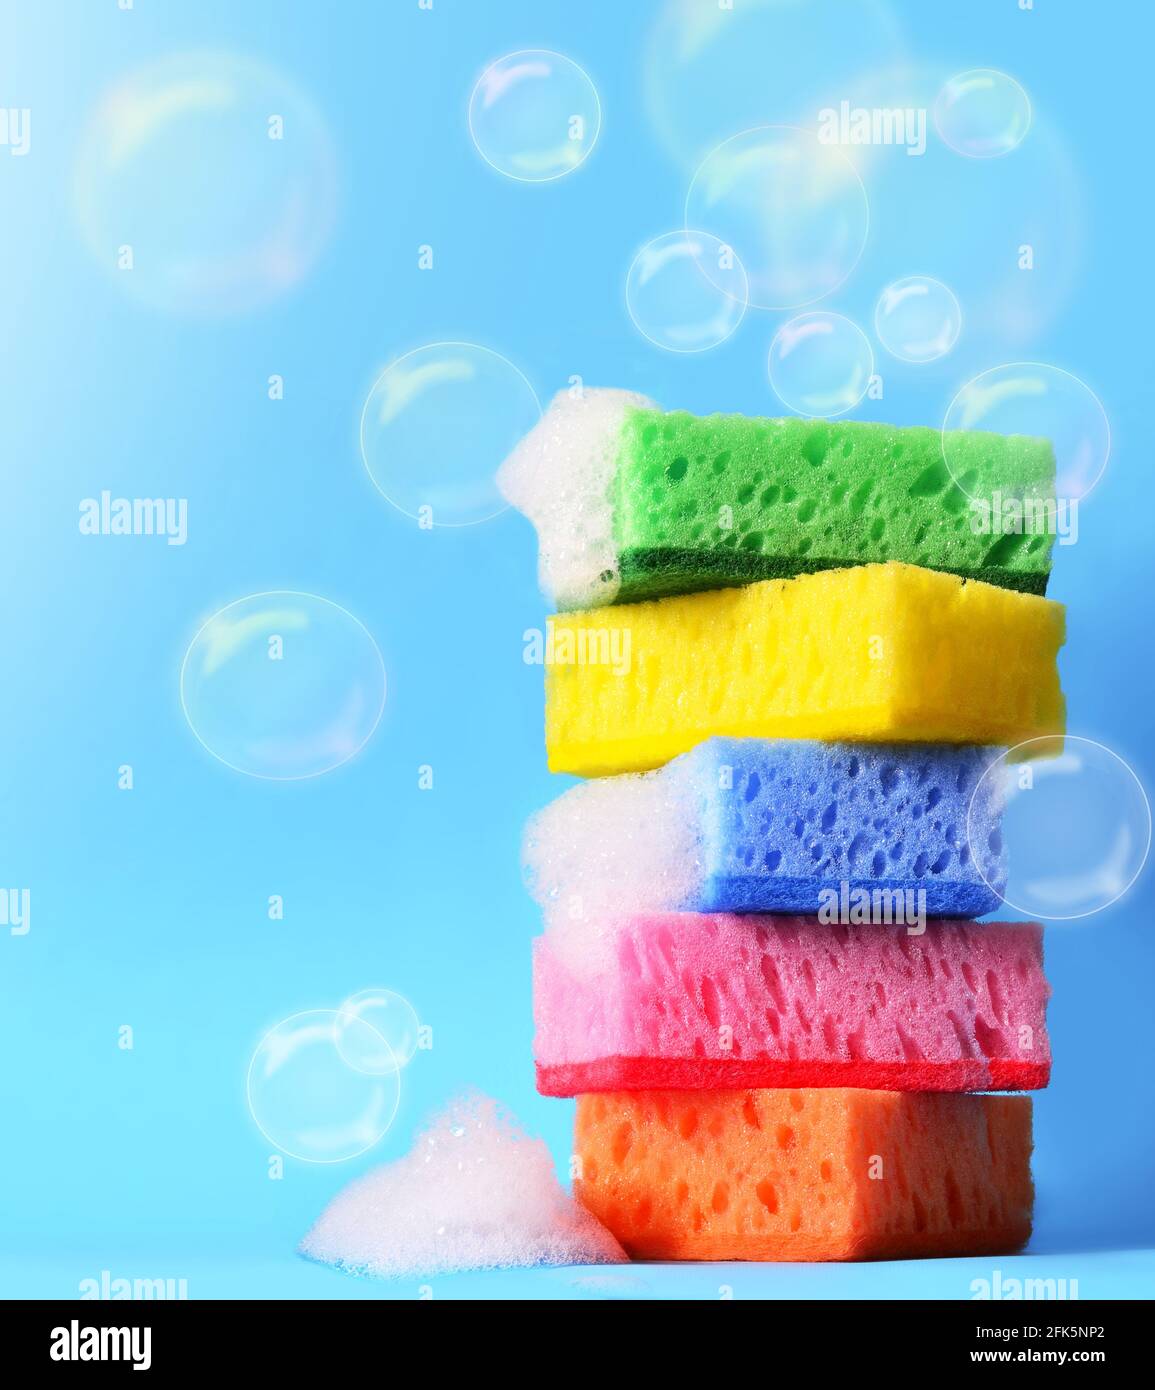 https://c8.alamy.com/comp/2FK5NP2/sponges-cleaning-kit-isolated-on-blue-background-and-foam-2FK5NP2.jpg